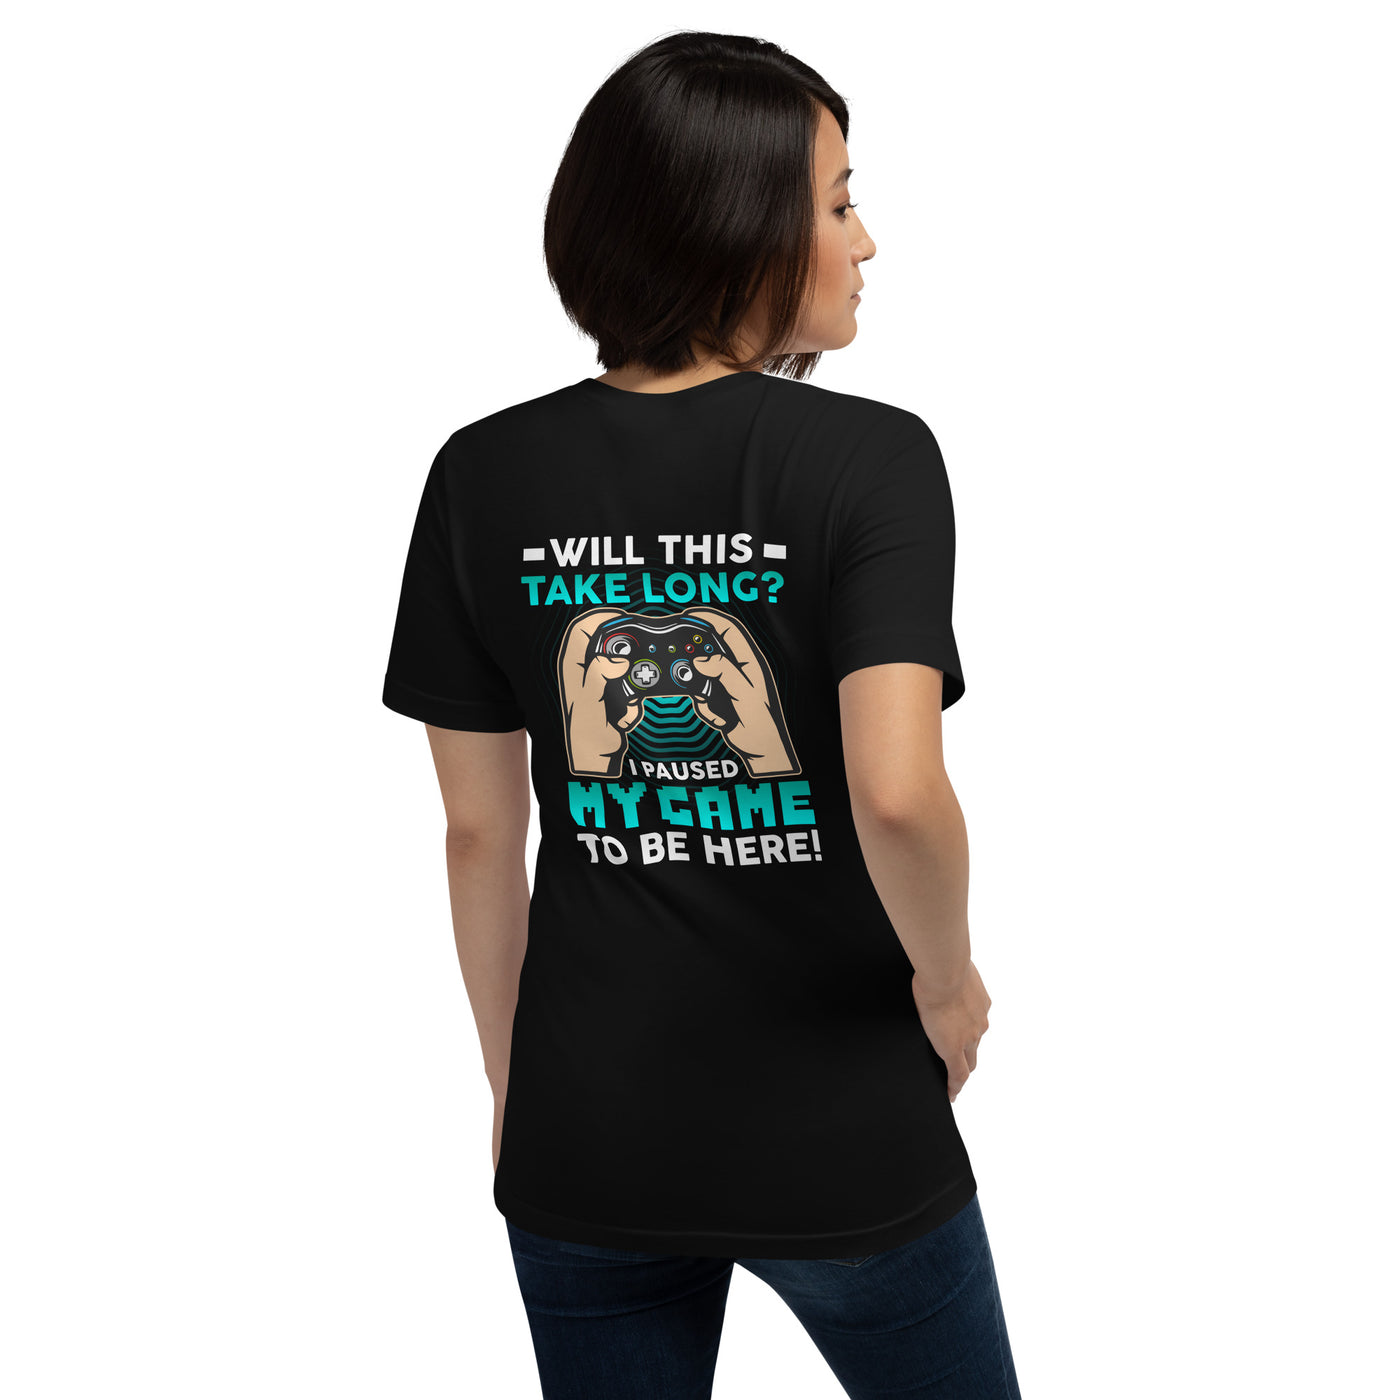 Will this take long, I paused my game to be here - Unisex t-shirt ( Back Print )